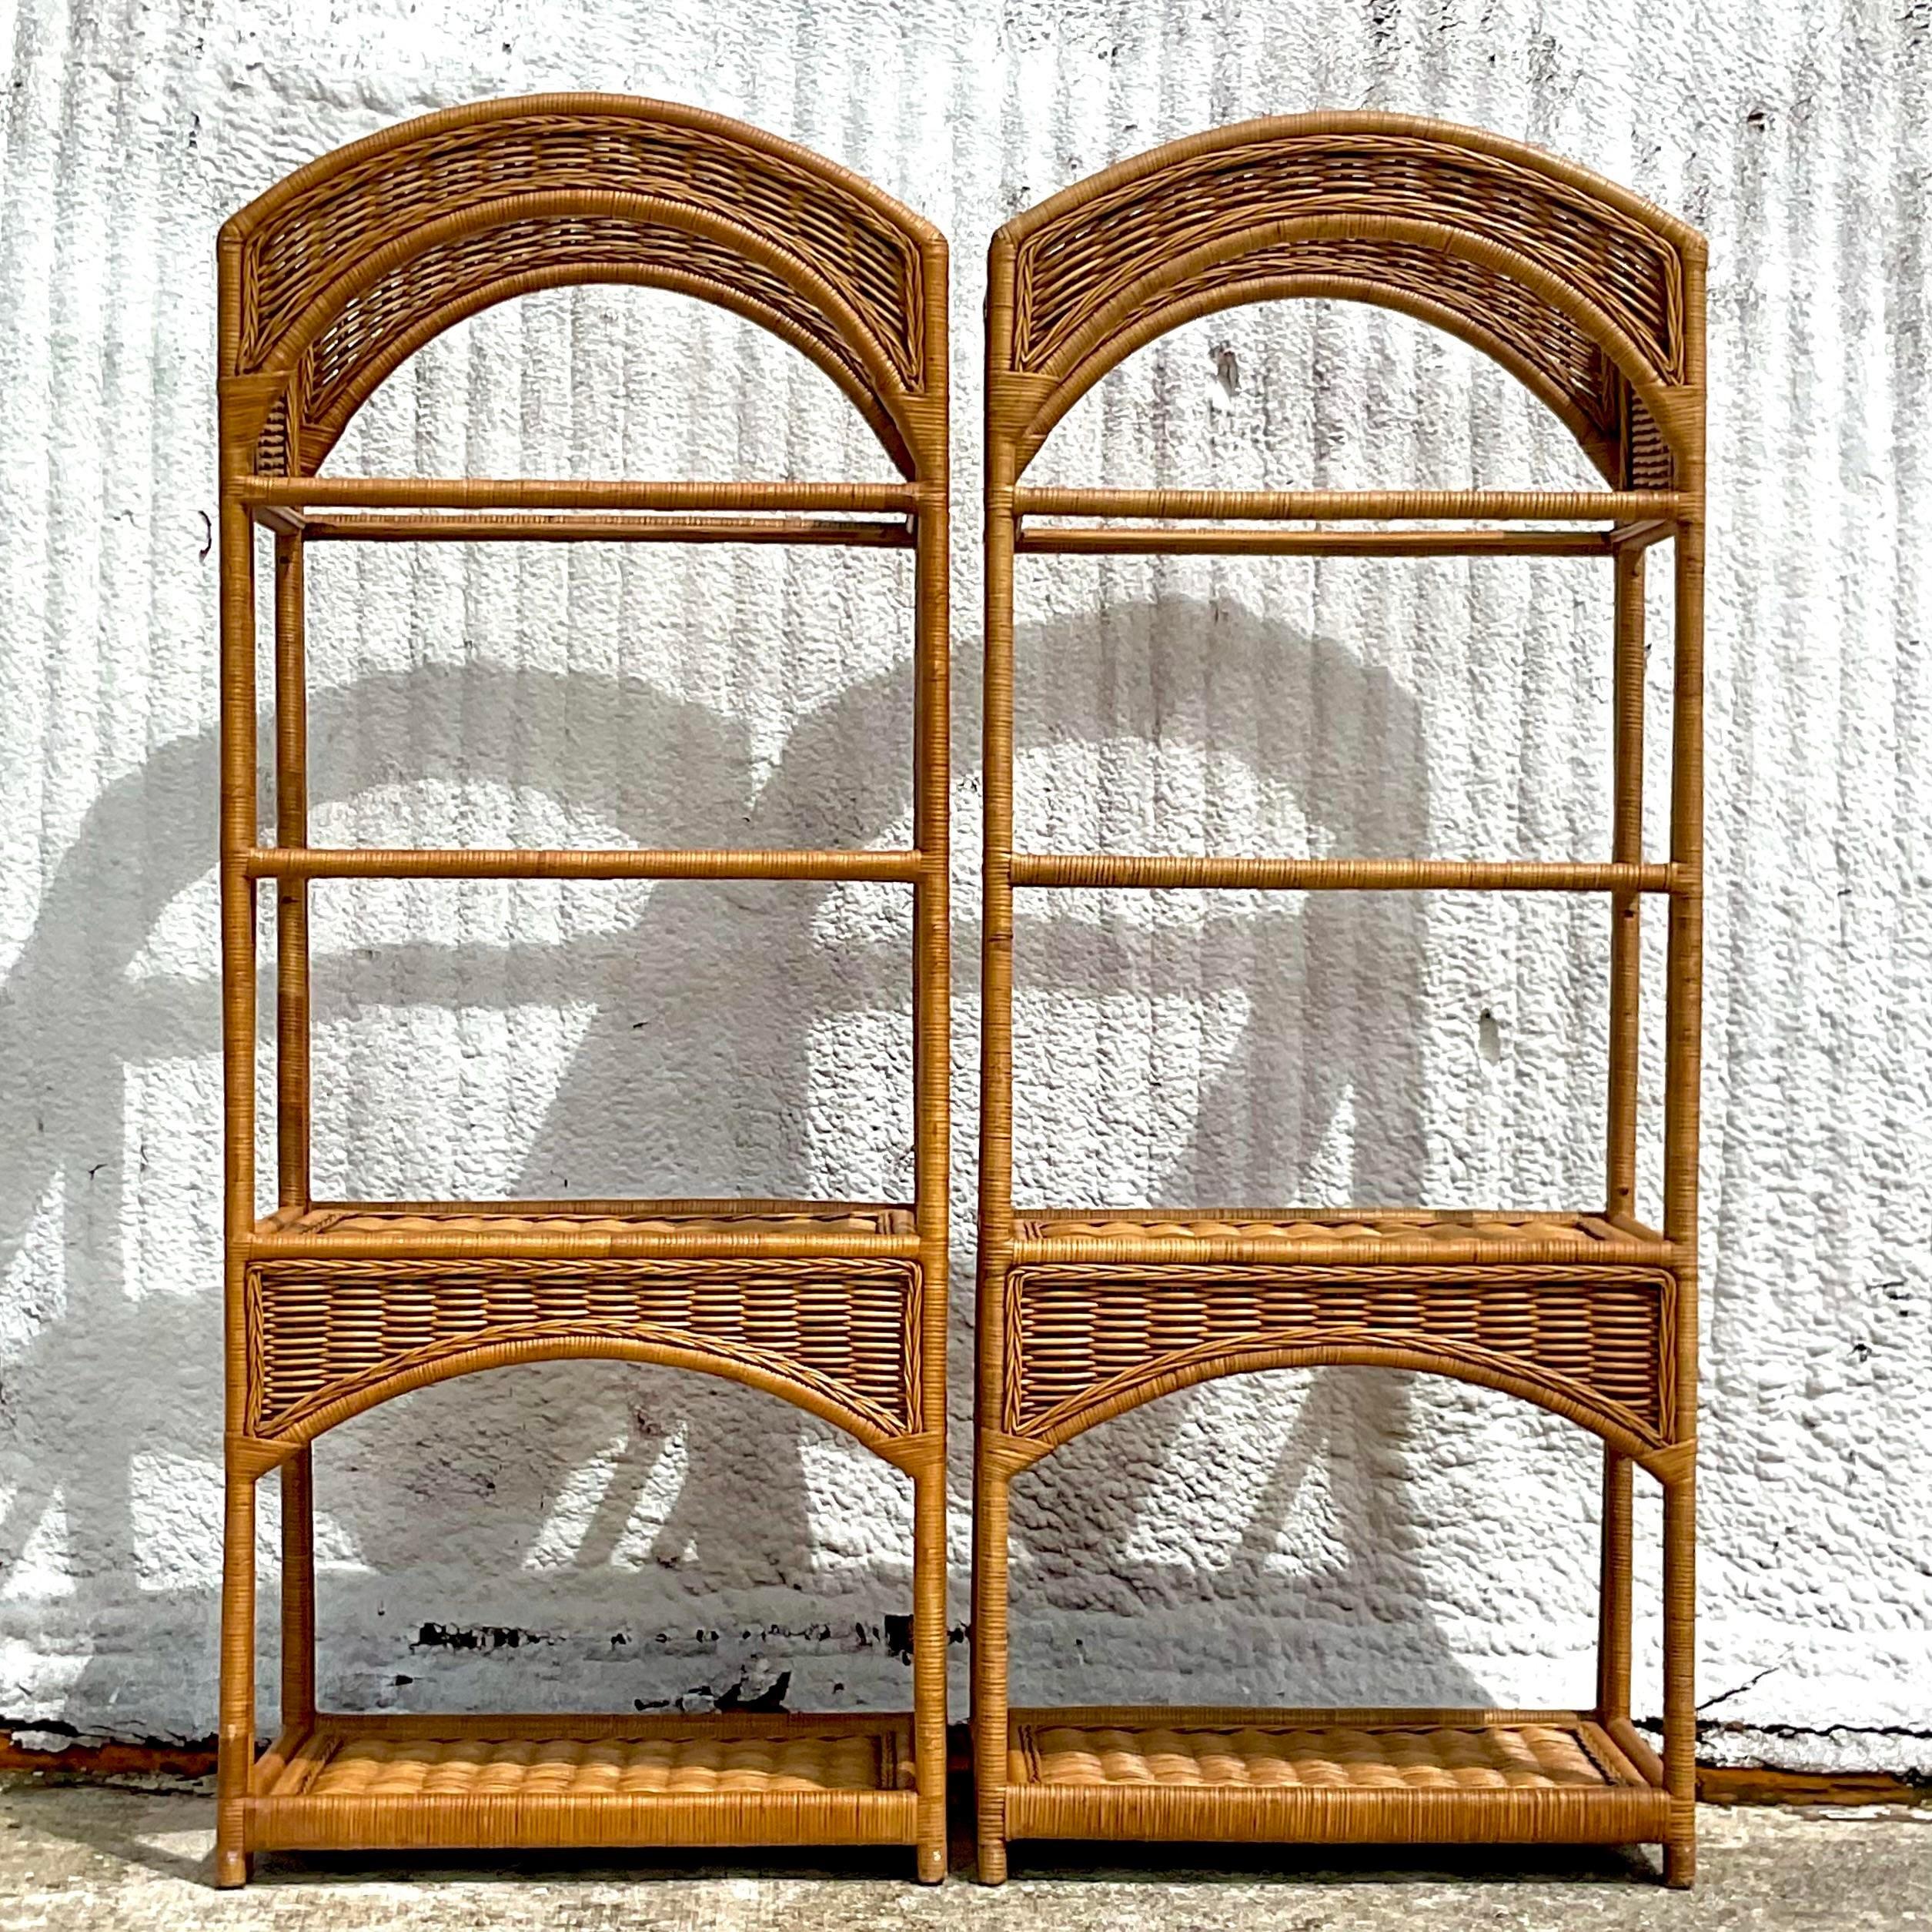 Fantastic pair of vintage Coastal etagere. Beautiful arched design with inset glass shelves. Beautiful in their simplicity. Acquired from a Palm Beach estate.